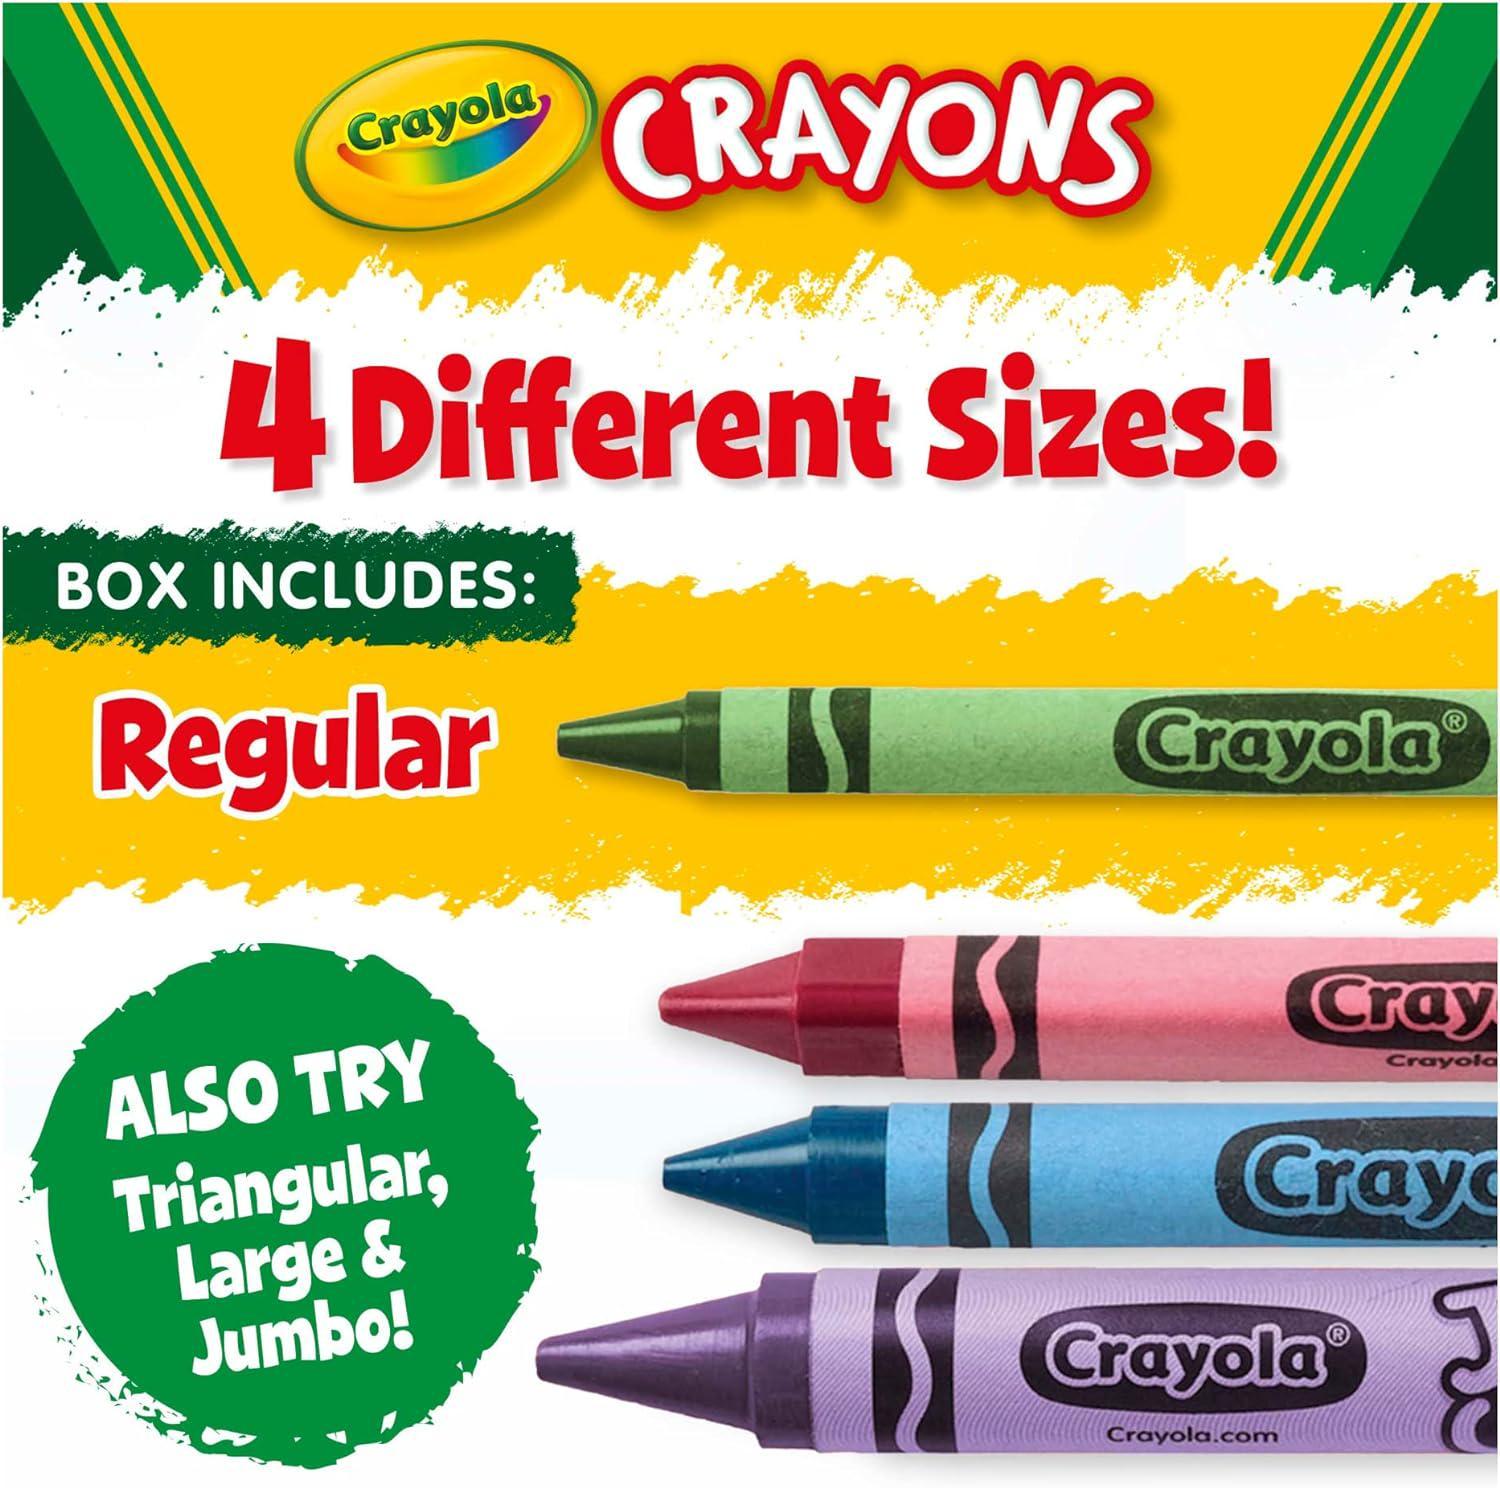  Hieno 100% Pure Beeswax Crayons Non Toxic HandmadeNatural  Jumbo Crayons Safe For Kids And Toddlers